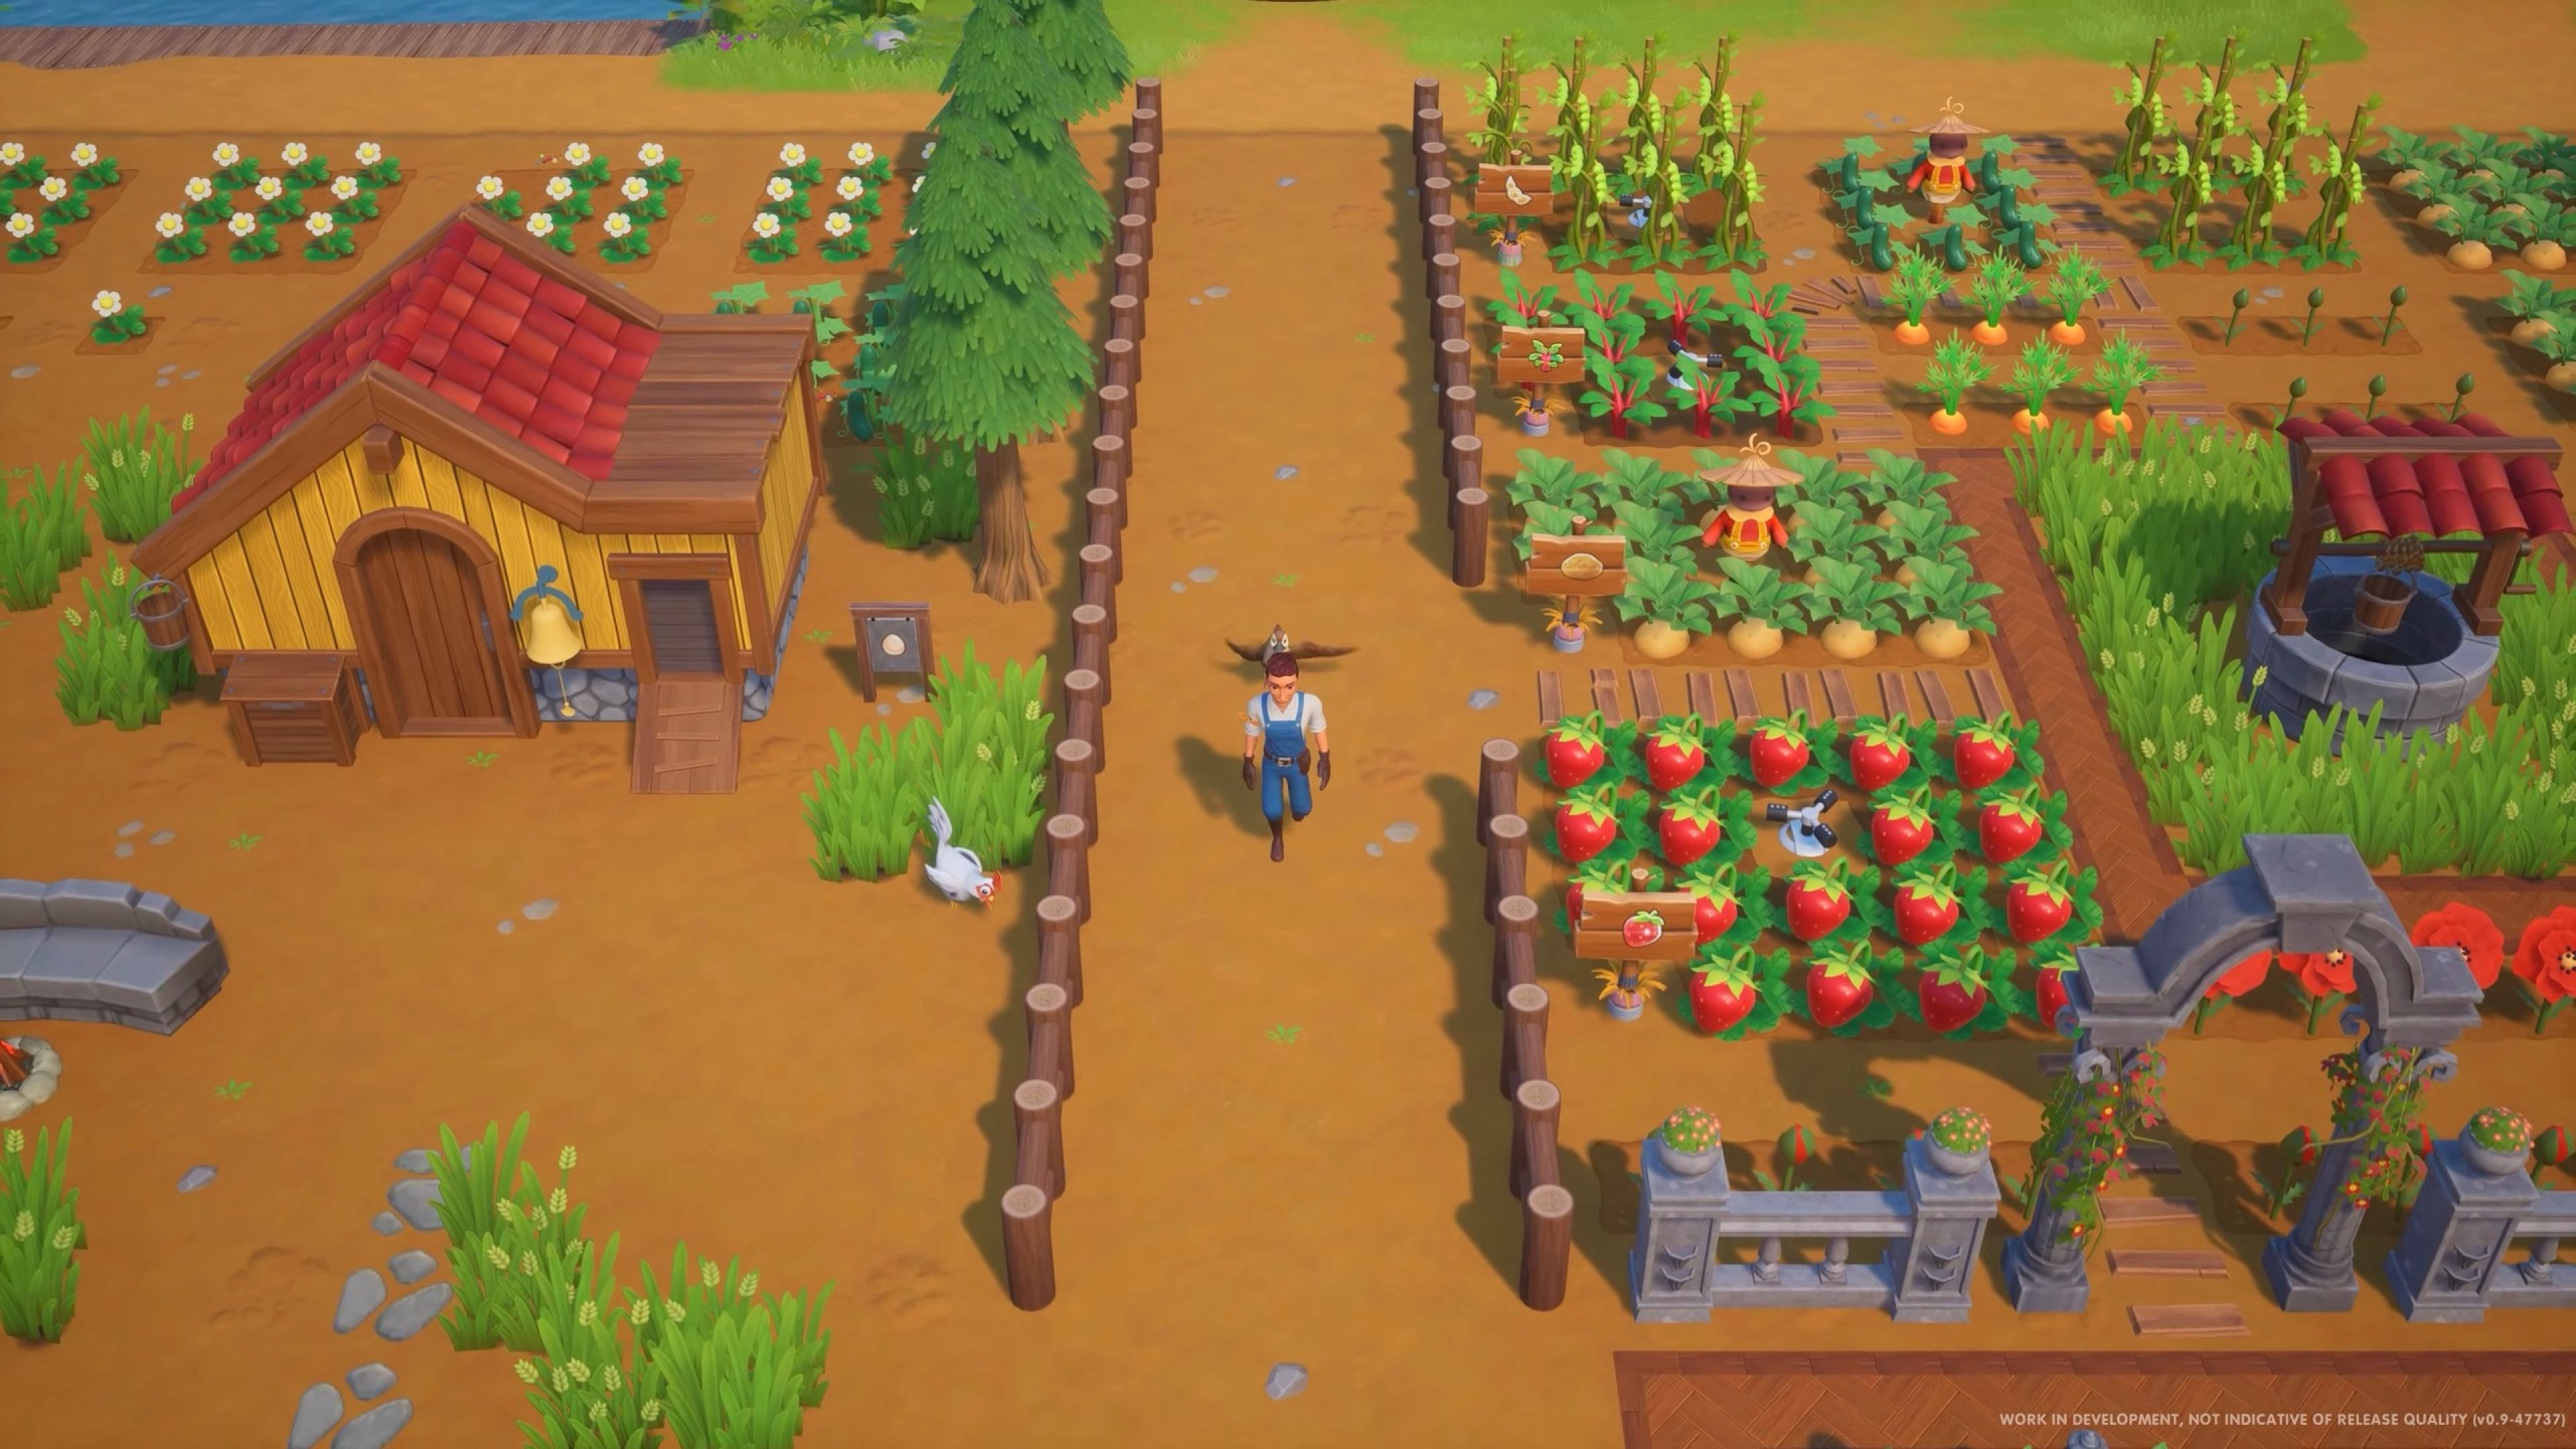 Coral Island Player Walking Past Potato Crop Patch With Scarecrow